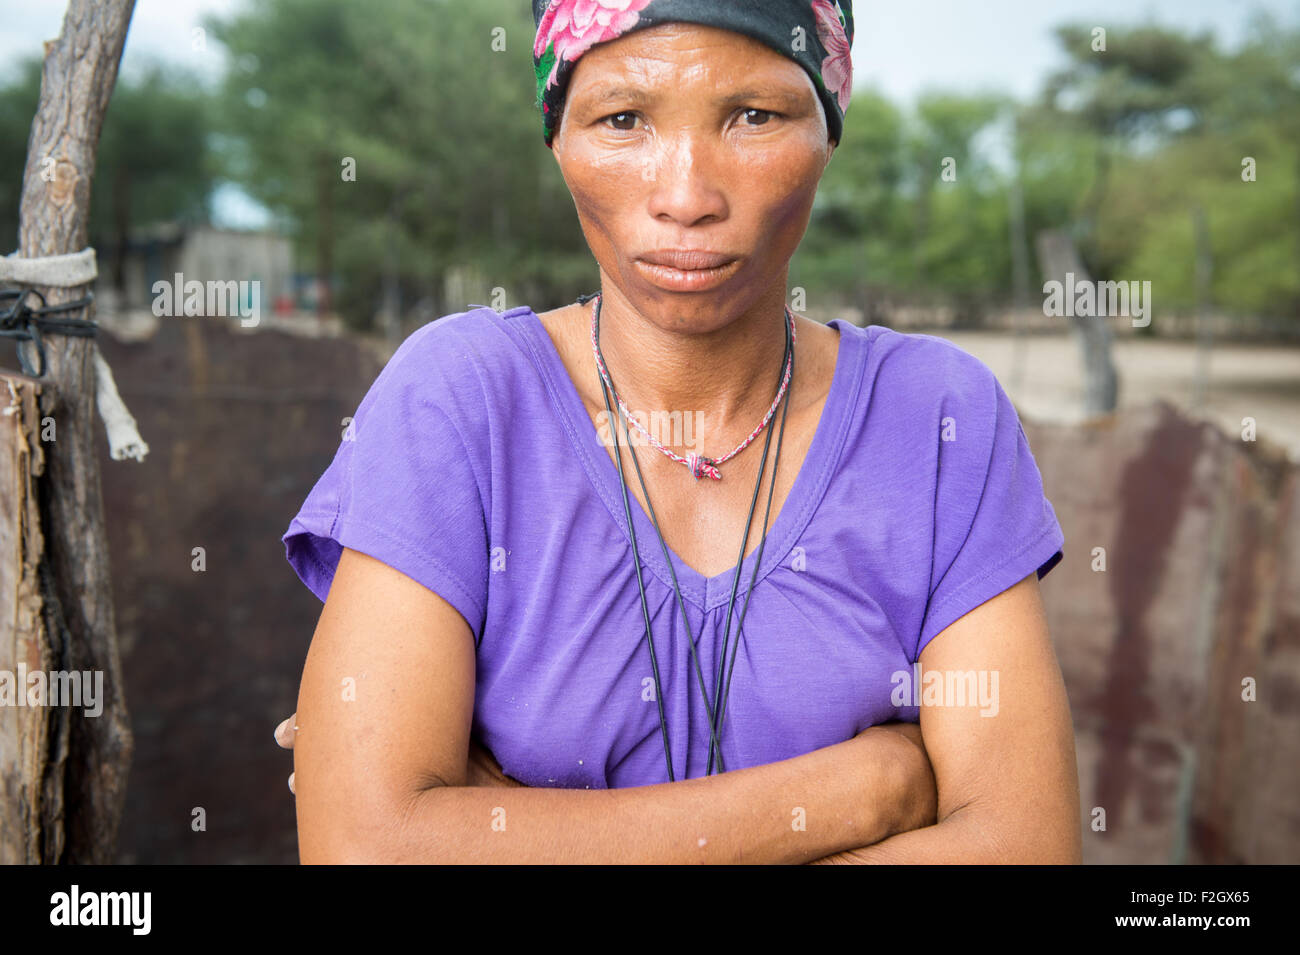 Ghanzi woman with colorful head wrap in Botswana, Africa Stock Photo